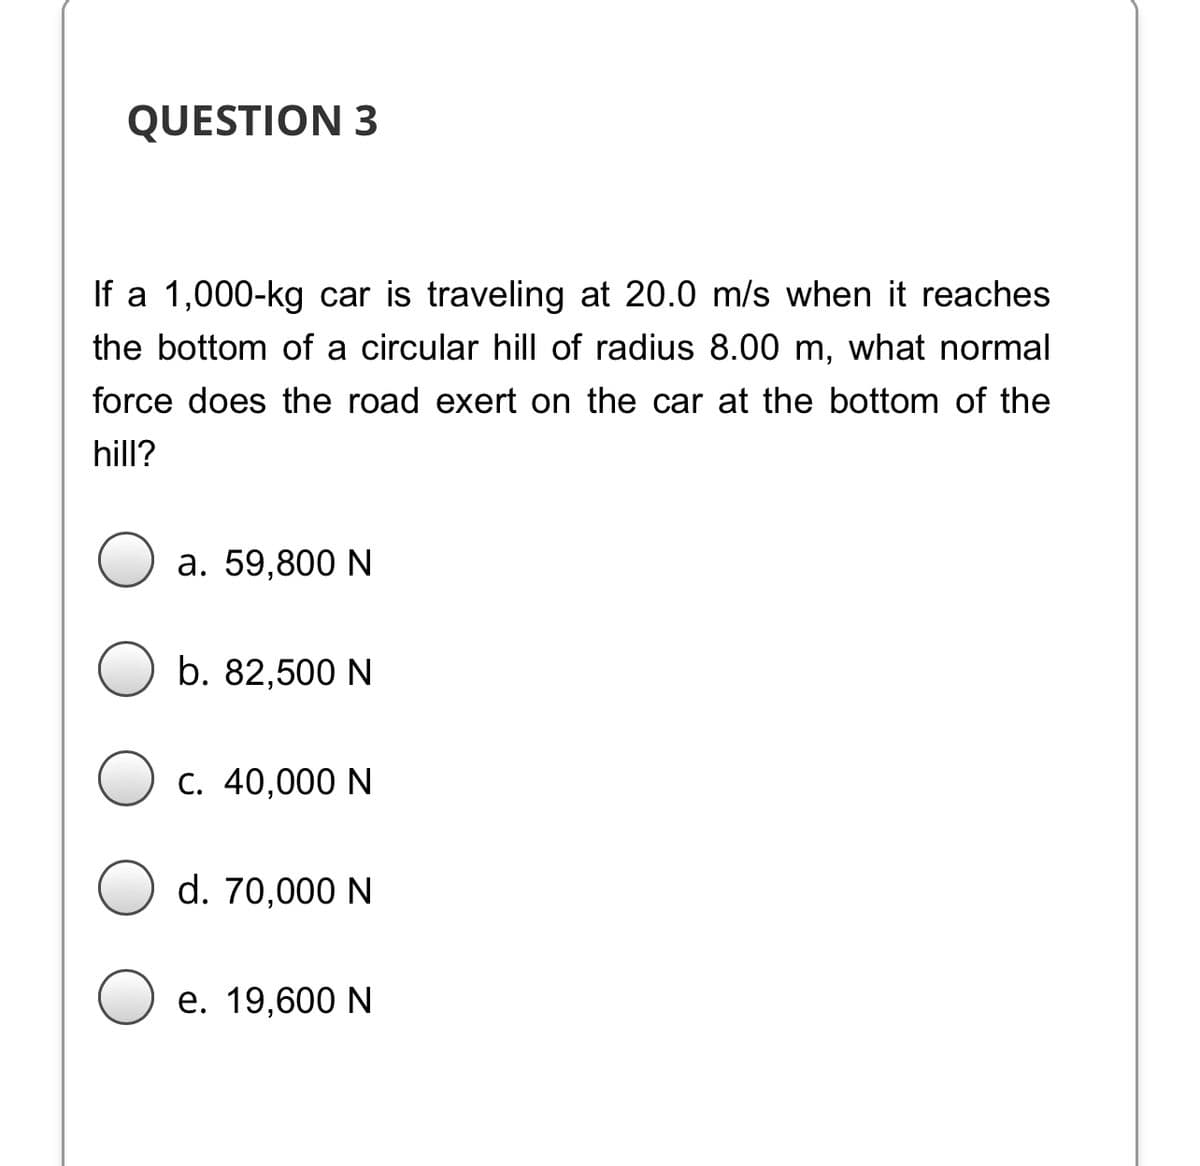 QUESTION 3
If a 1,000-kg car is traveling at 20.0 m/s when it reaches
the bottom of a circular hill of radius 8.00 m, what normal
force does the road exert on the car at the bottom of the
hill?
a. 59,800 N
b. 82,500 N
C. 40,000 N
d. 70,000 N
e. 19,600 N
